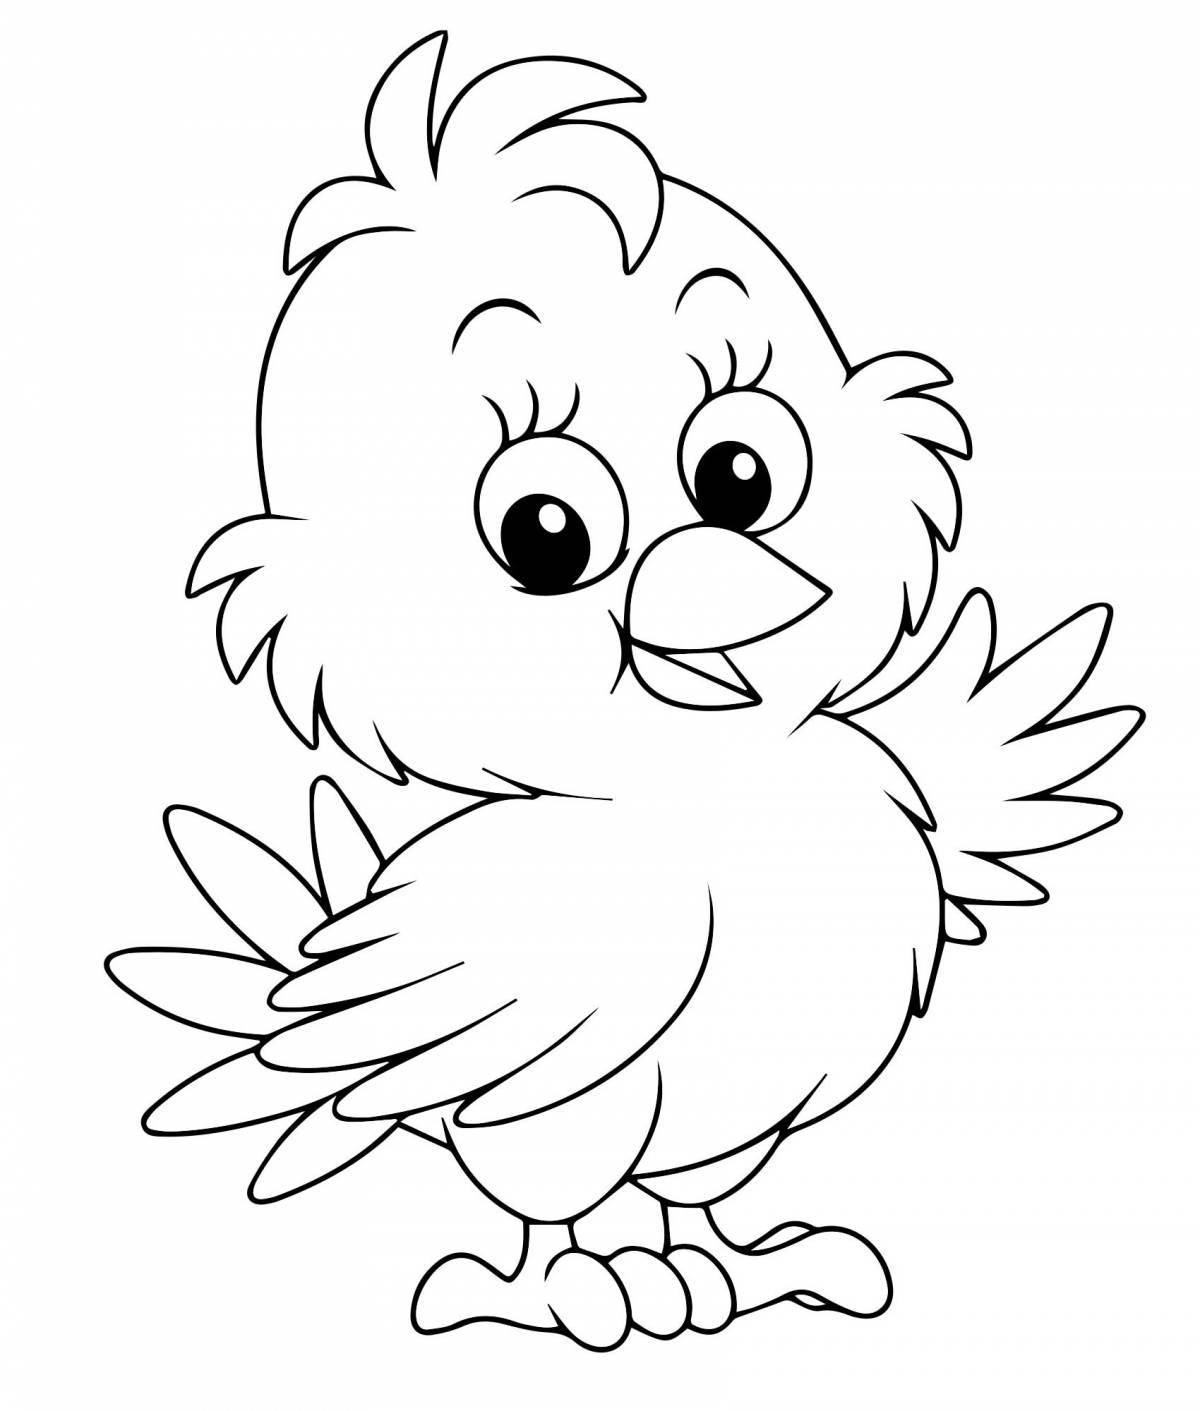 Chick picture for kids #1